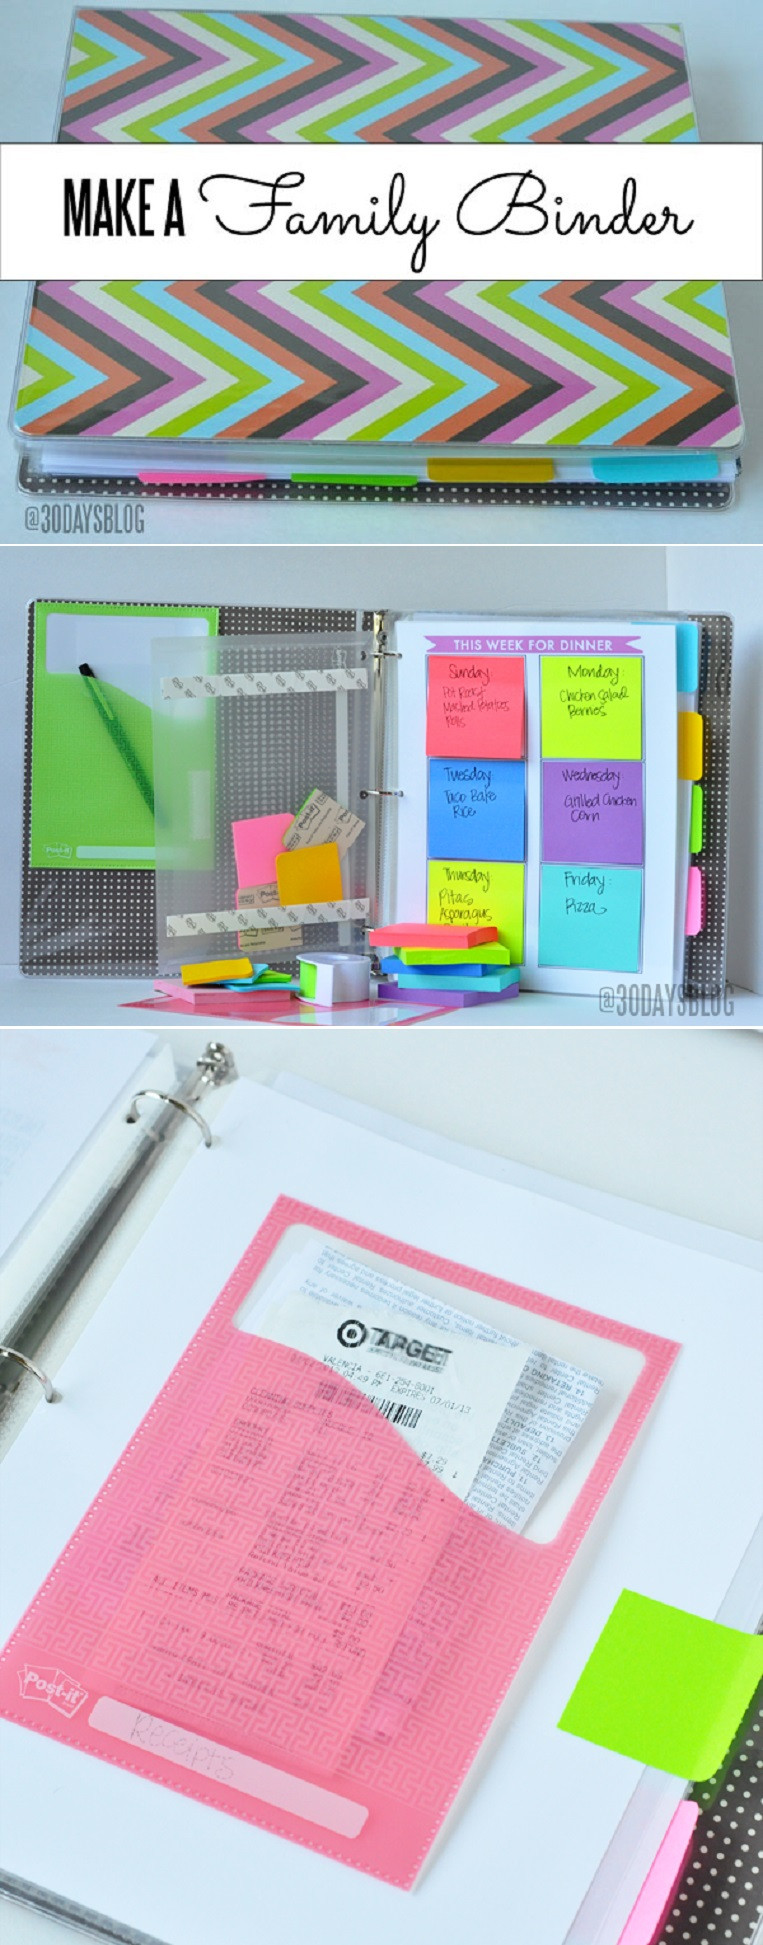 DIY Binder Organization
 12 DIY Binder Organization Projects